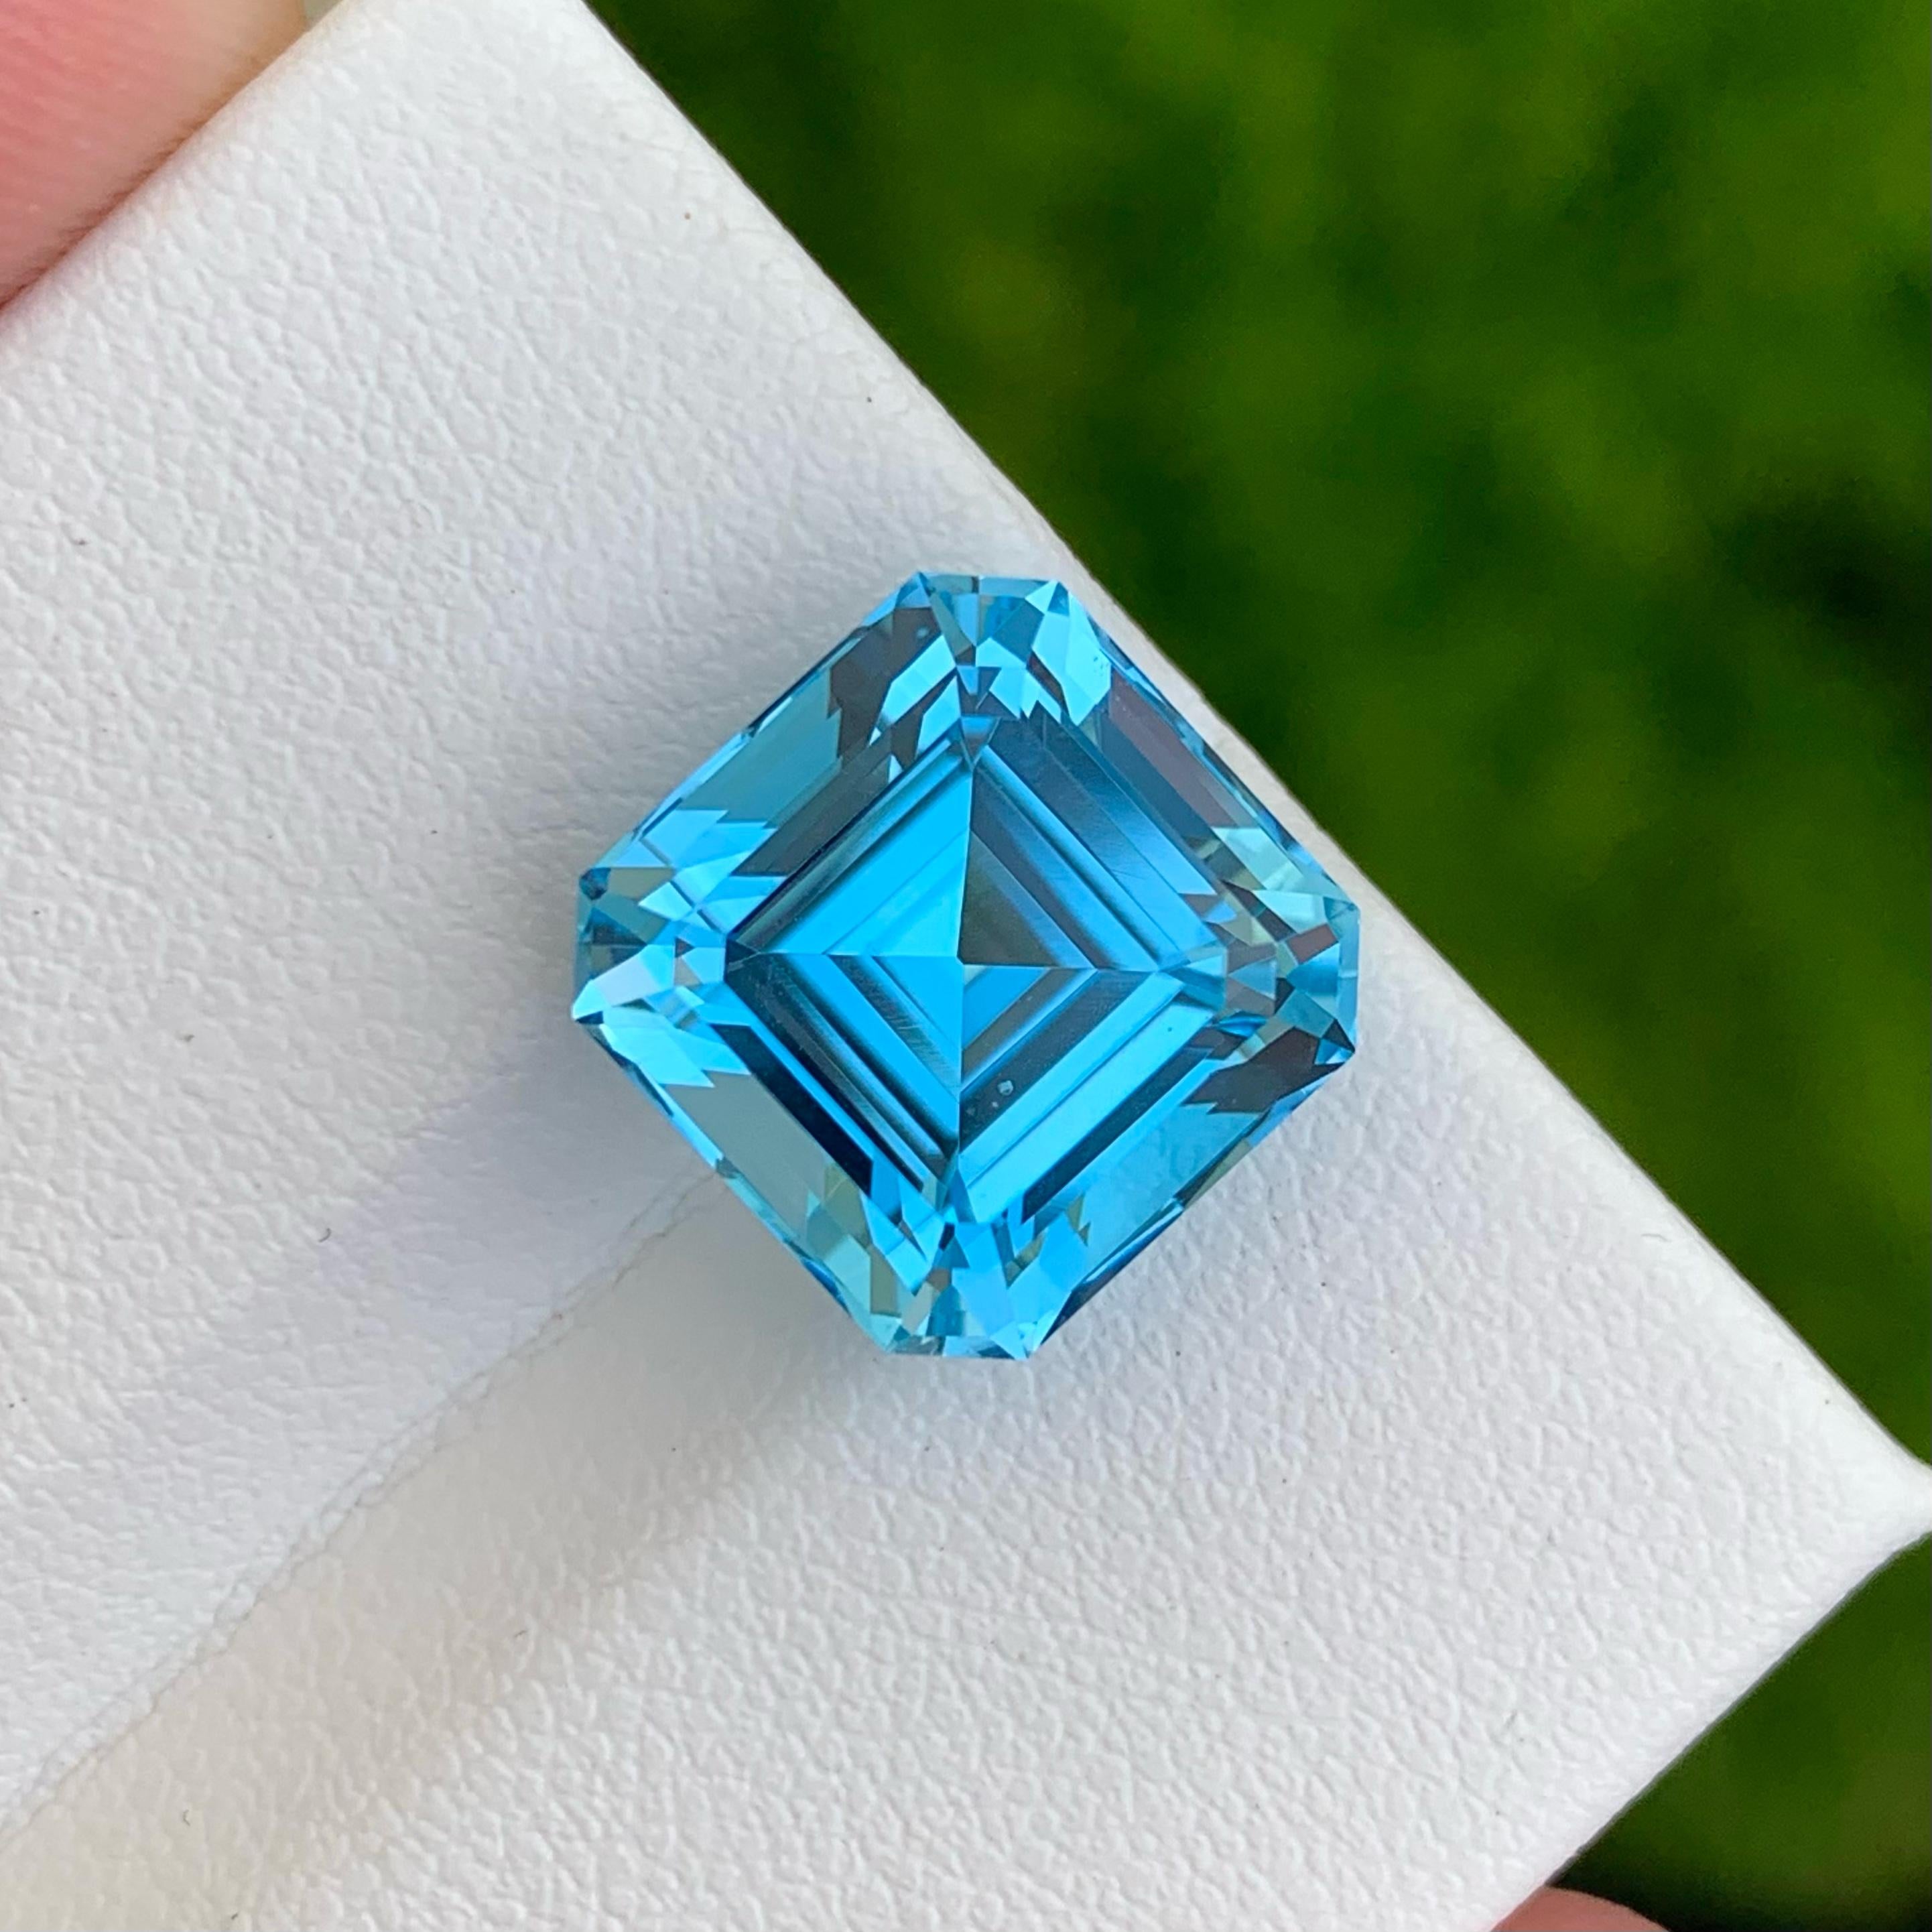 Weight 11.60 carats 
Dimensions 11.9x11.8x9.4 mm
Treatment Irradiated 
Origin Madagascar 
Clarity VVS 
Shape octagon
Cut Asscher 

Swiss Blue Topaz is a versatile gemstone that can be beautifully incorporated into various jewelry pieces. Whether set